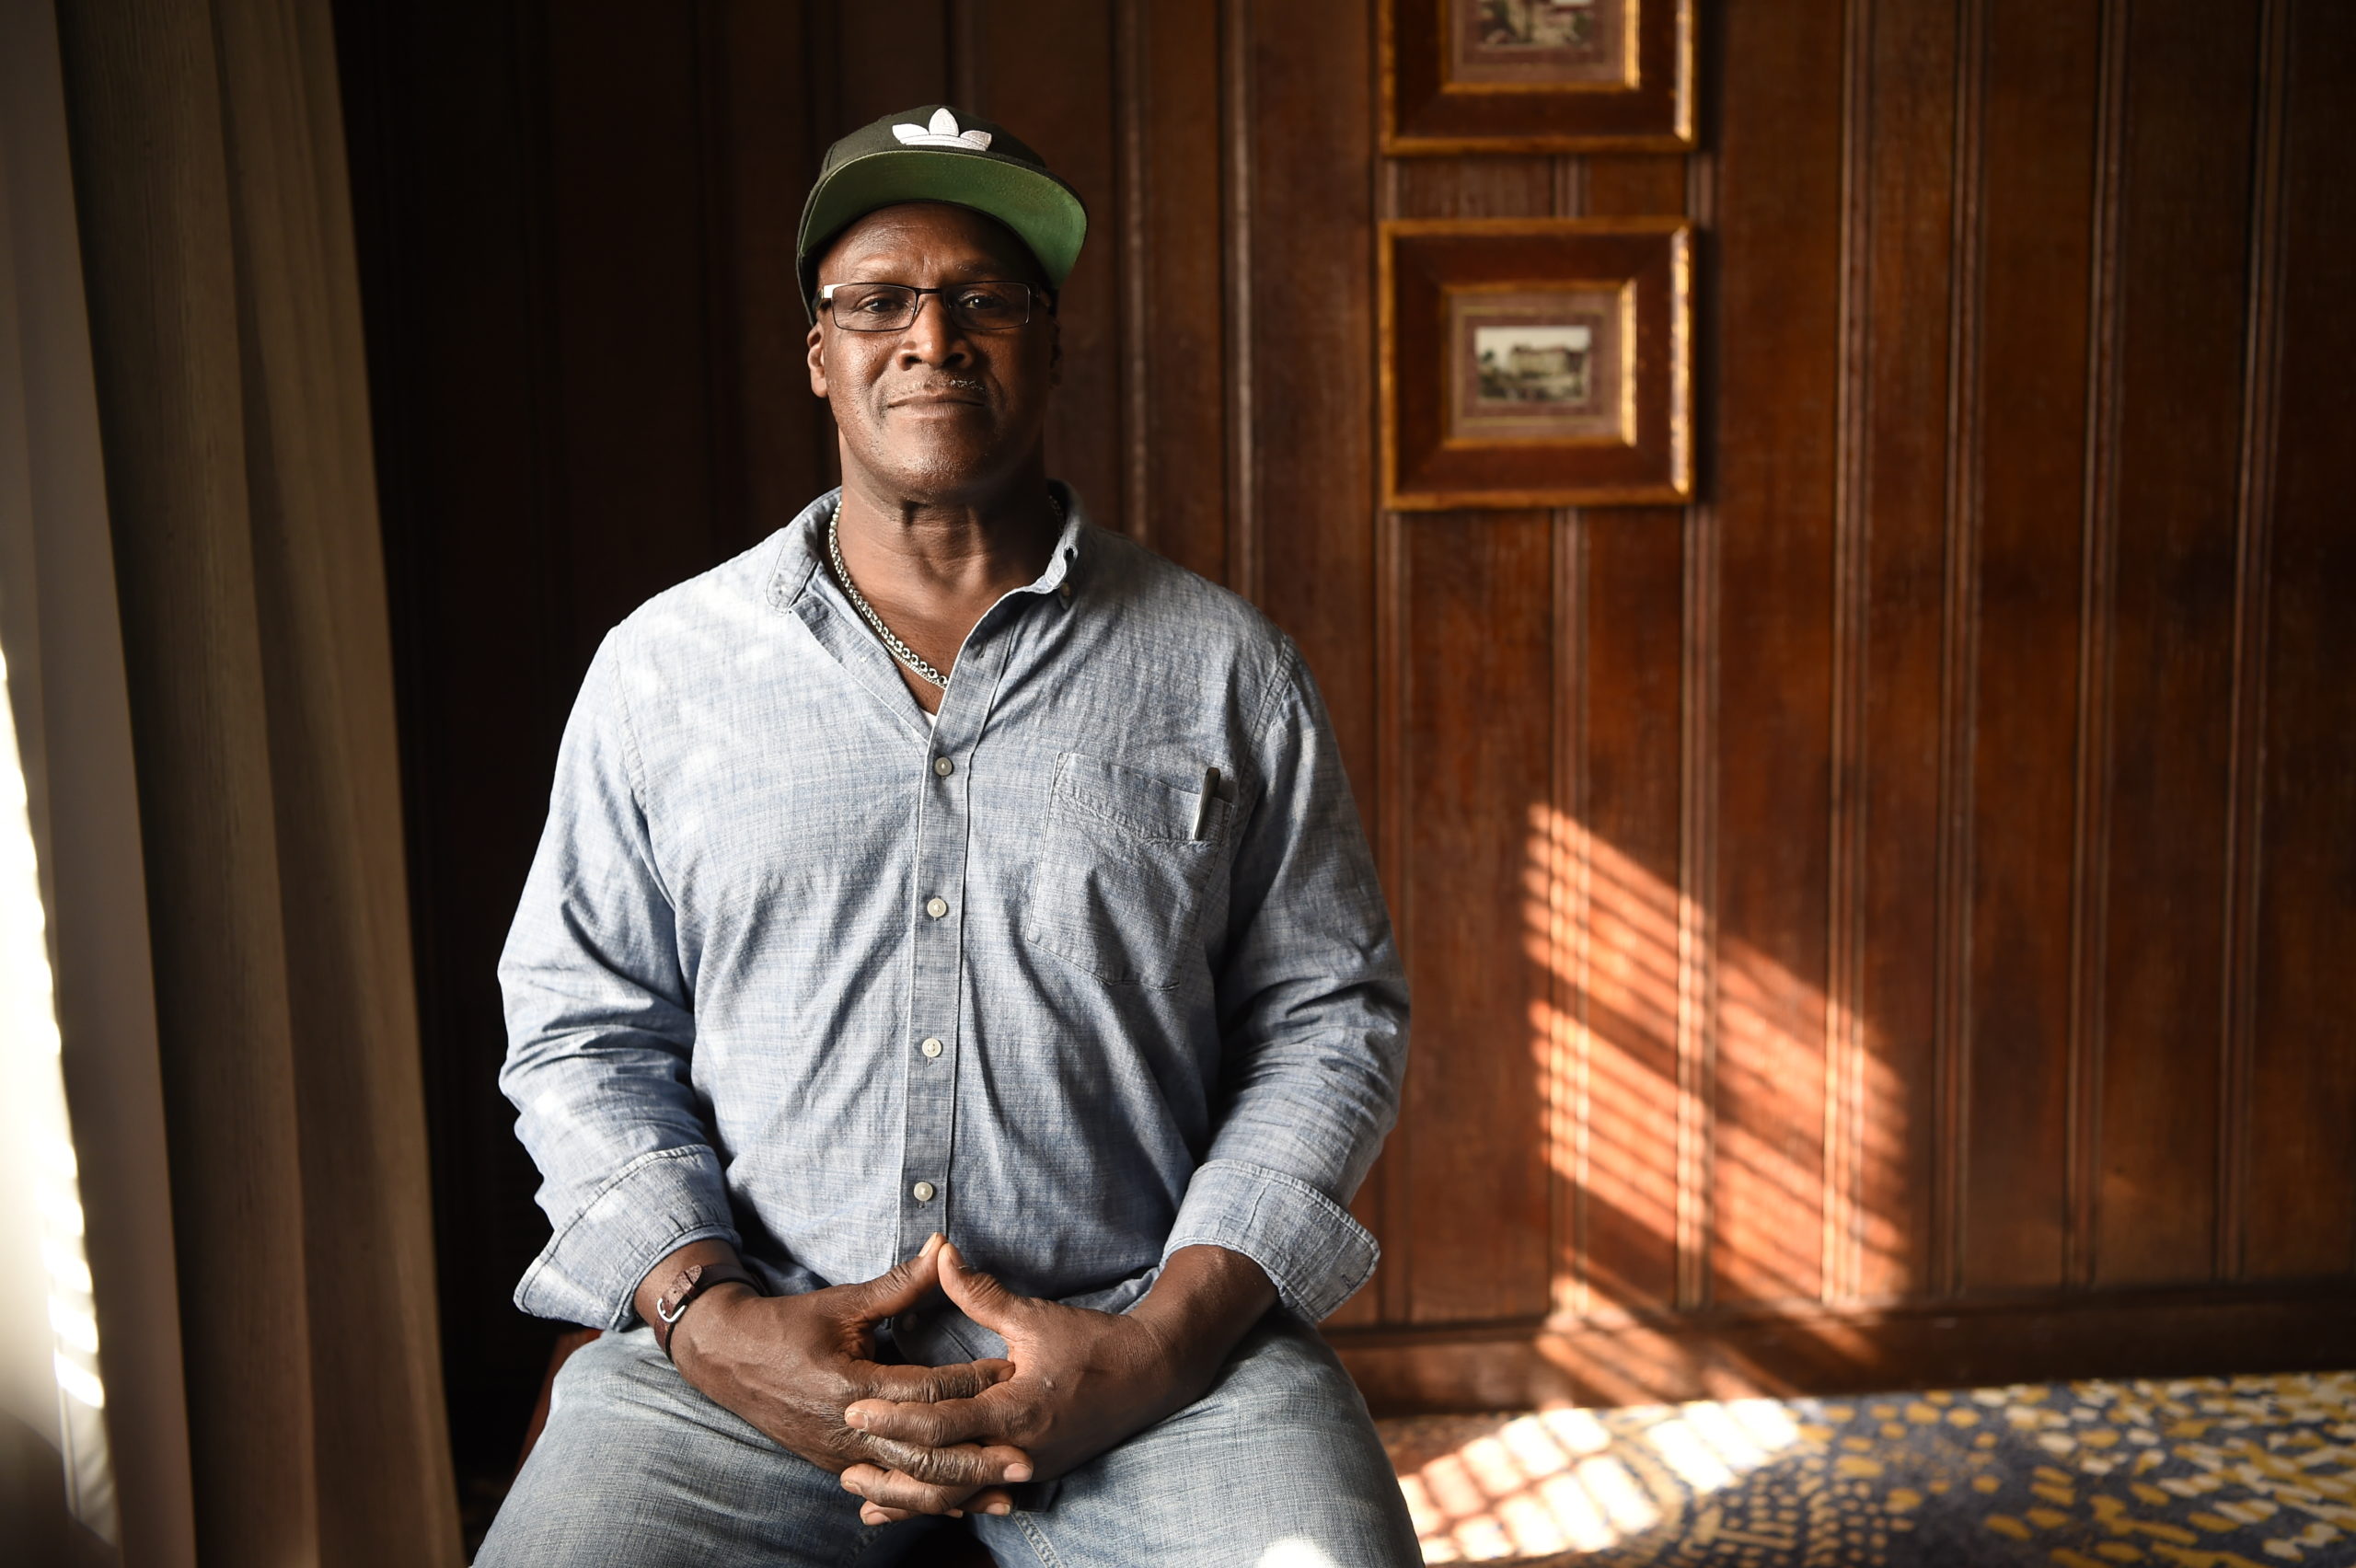 Malcolm Alexander. (Image: Lacy Atkins/Innocence Project)